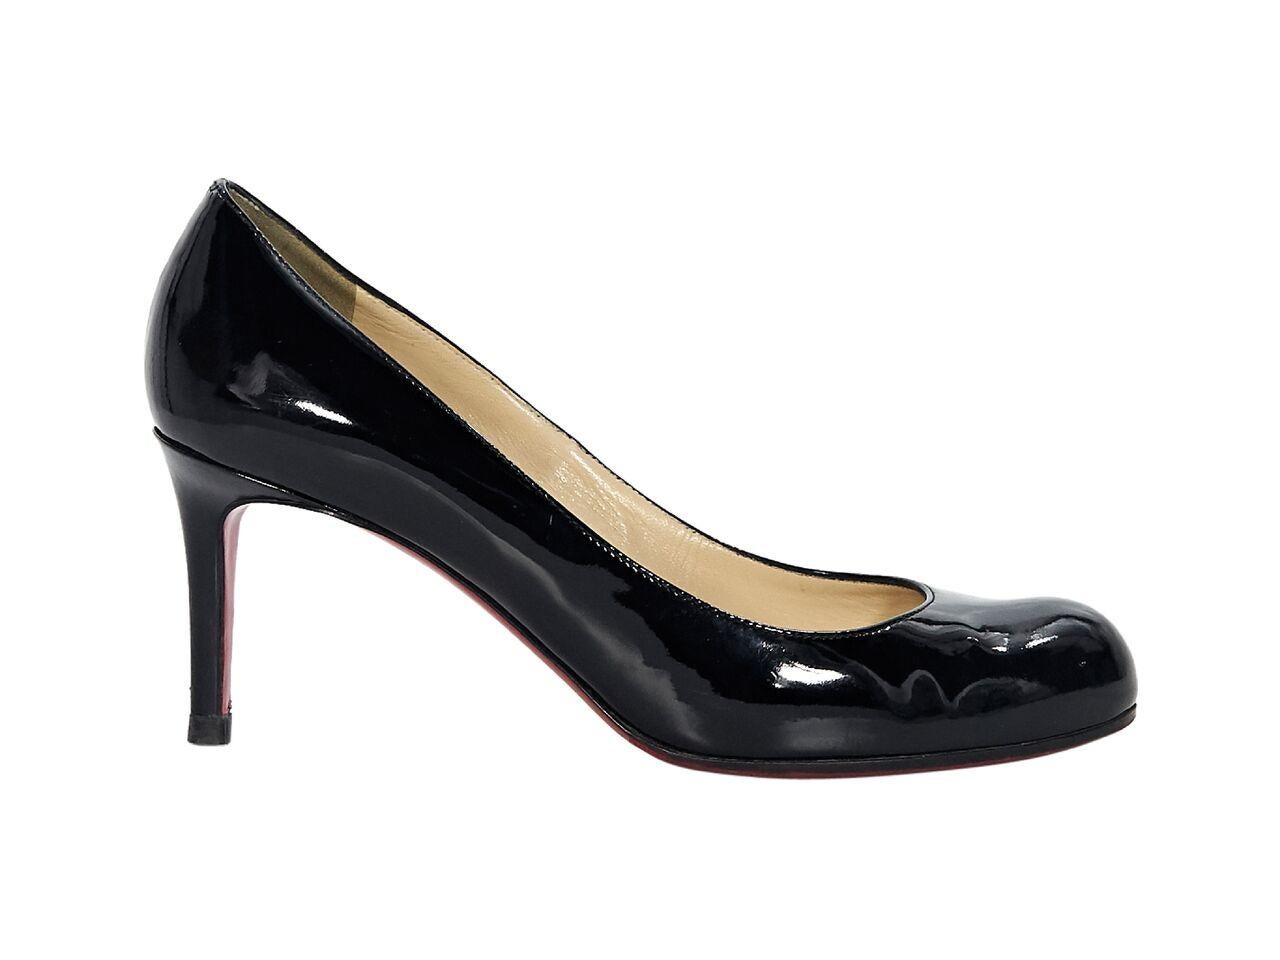 Product details:  Black patent leather pumps by Christian Louboutin.  Round toe.  Iconic red sole.  Slip-on style.  3